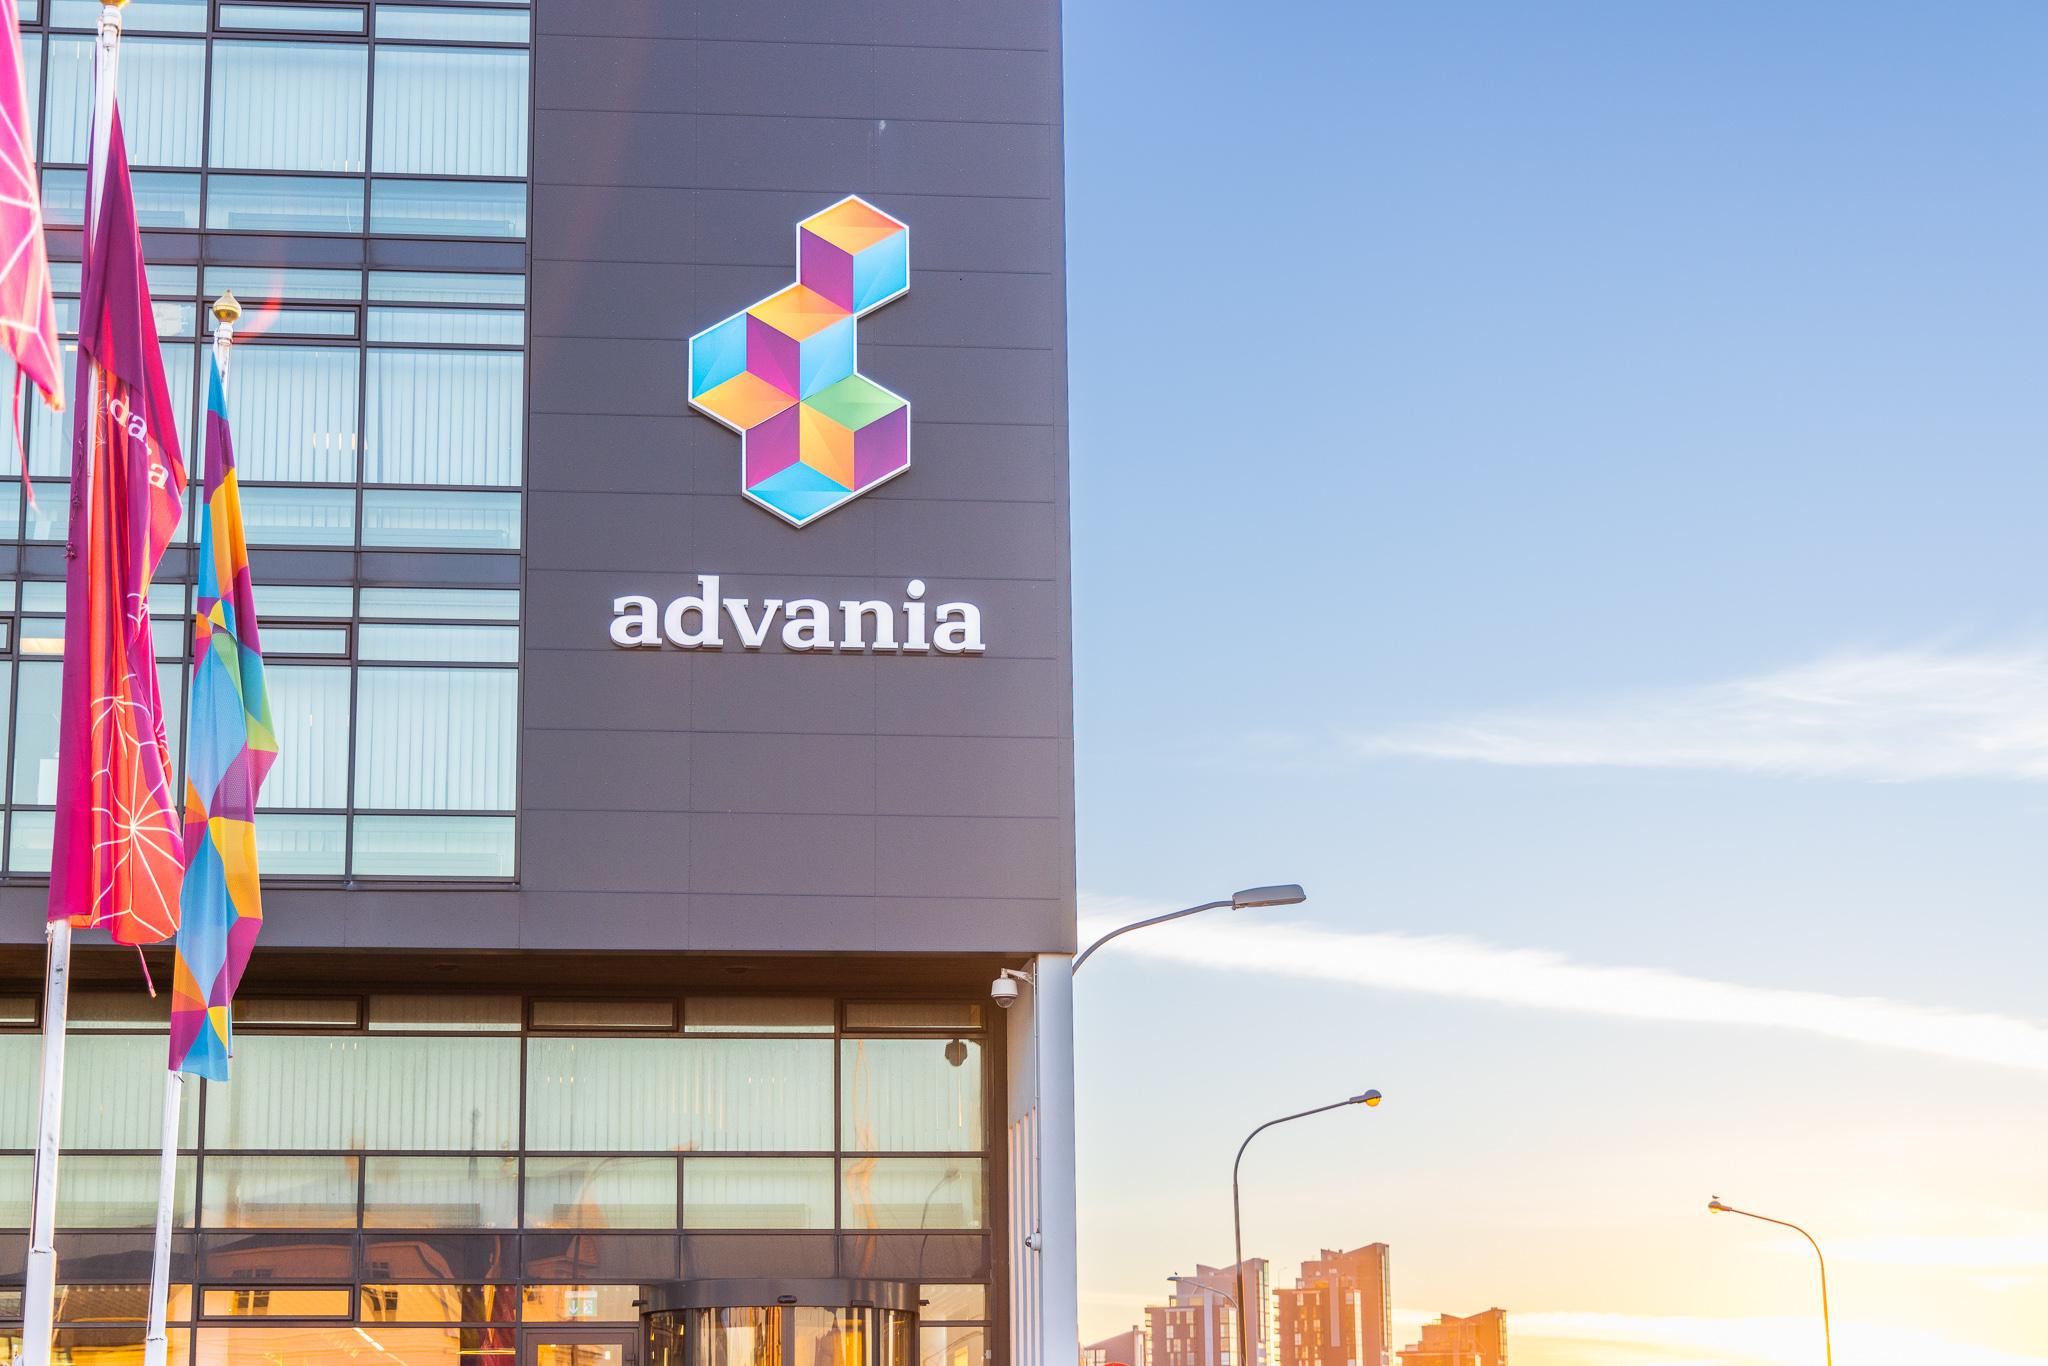 Advanced locking solutions need robust security – Abloy deepens its partnership with Advania